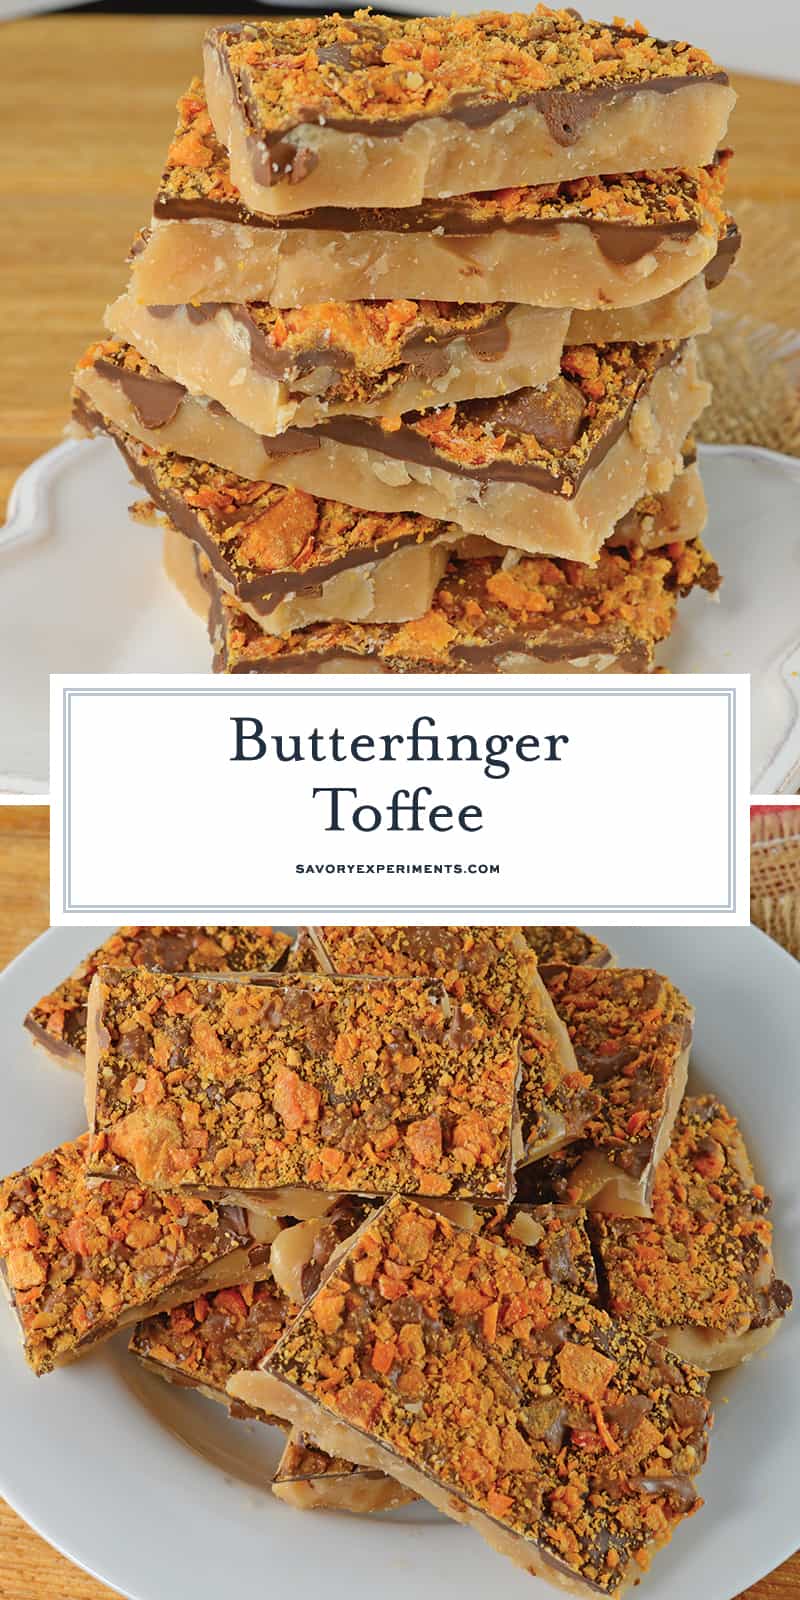 Candy Toffee is an easy holiday treat using only 6 ingredients and taking just 20 minutes! Make this easy toffee recipe for your holiday cookie tray! #buttertoffee #englishtoffee www.savoryexperiments.com